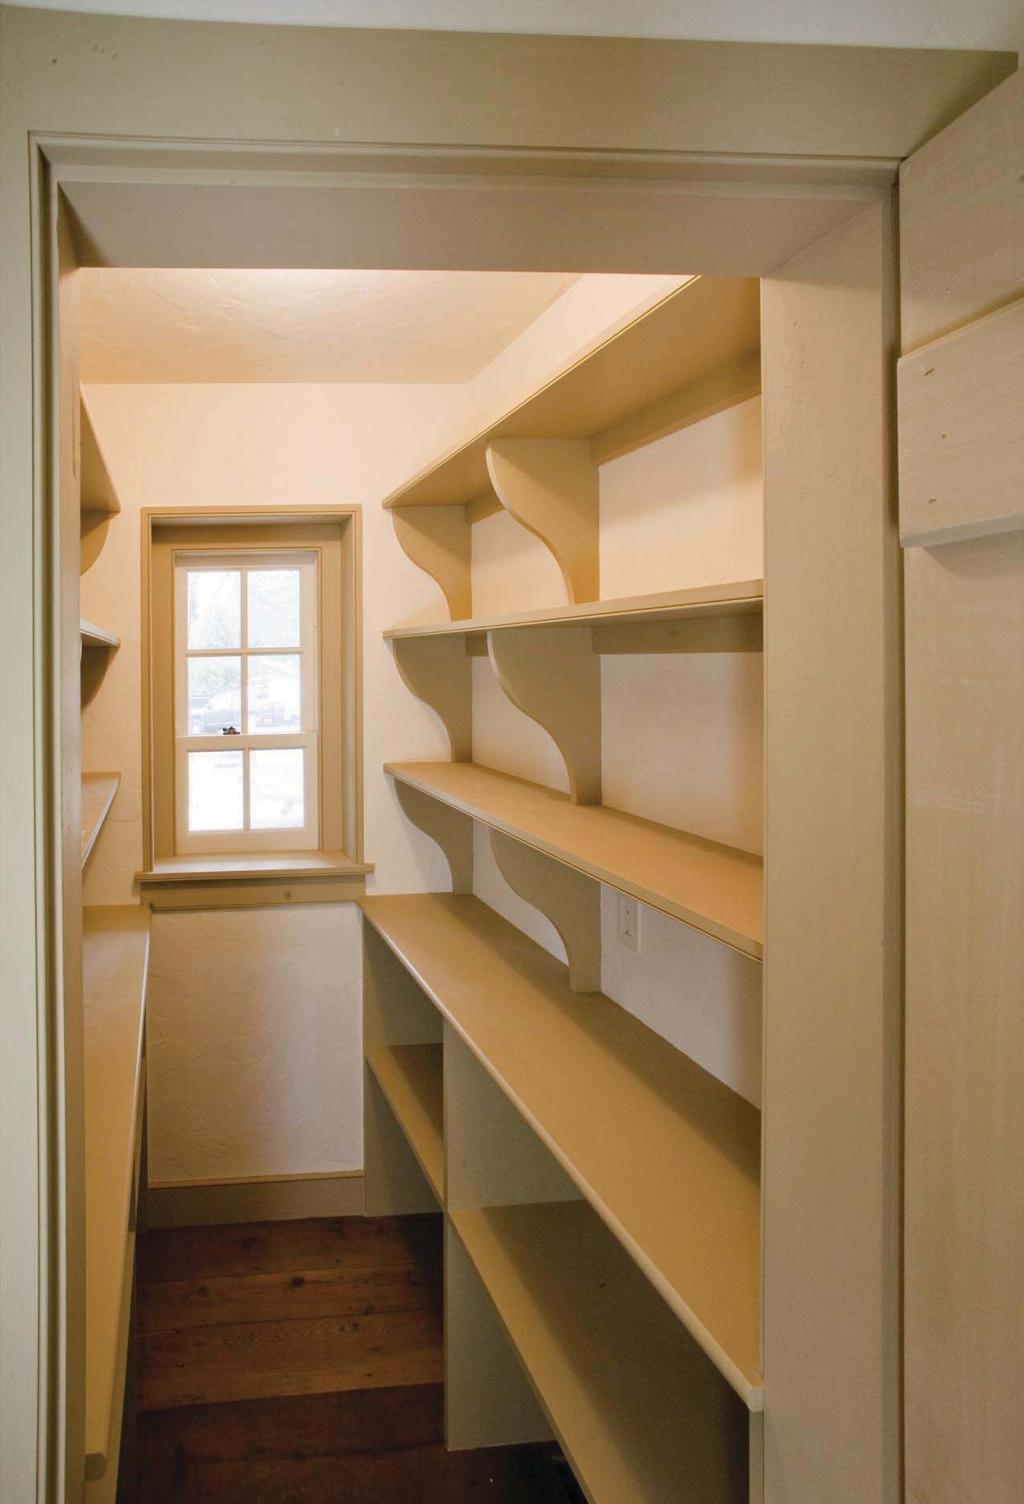 A. Deep Bracketed Pantry Shelving 8500 Poplar Customized for unique locations and